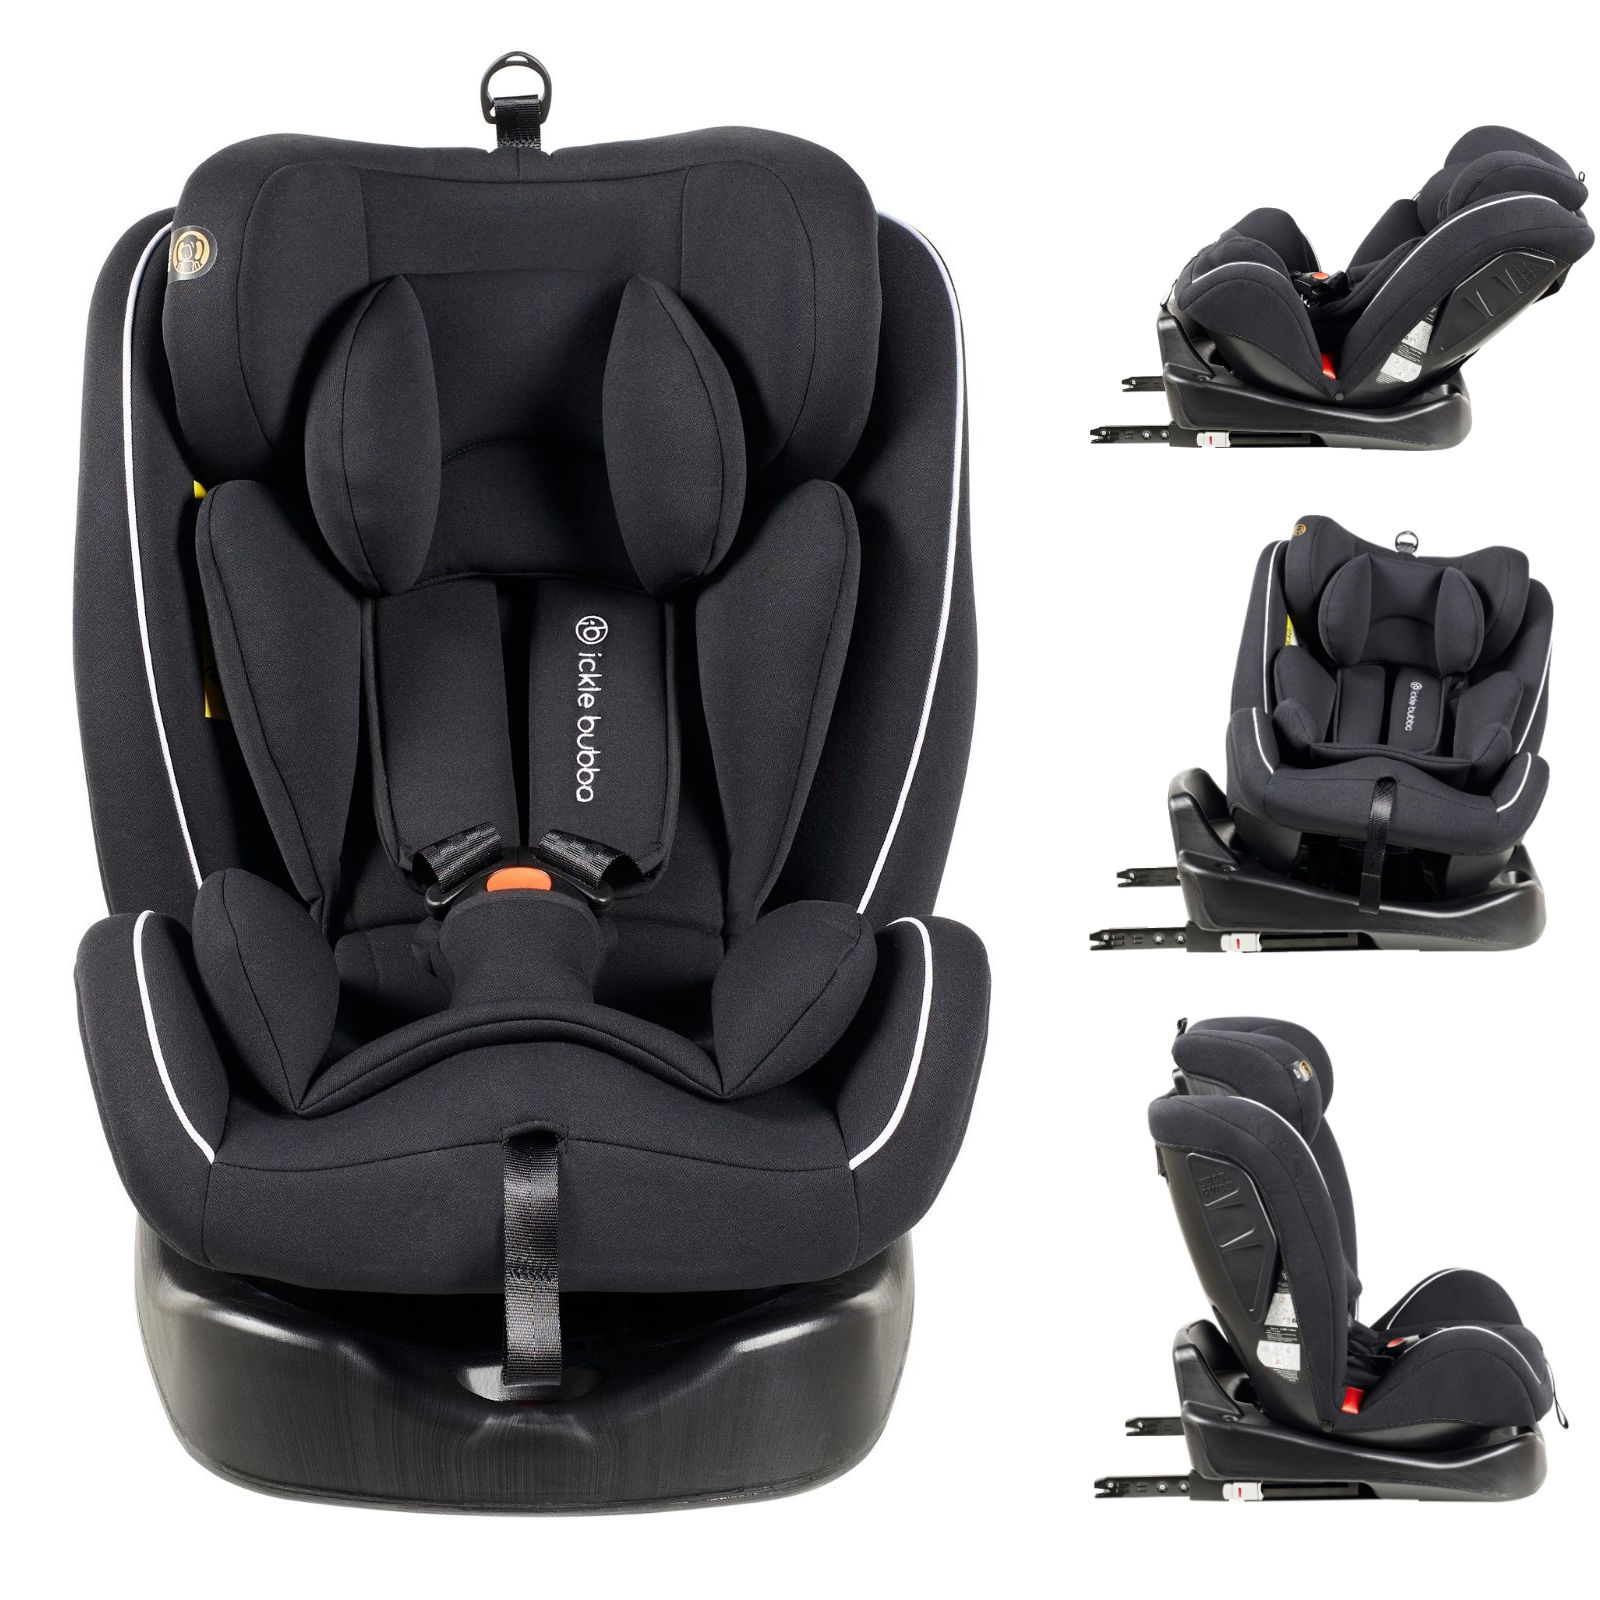 Ickle Bubba Rotator 360 Spin Group 0+/1/2/3 Car Seat - Black | Buy at Online4baby